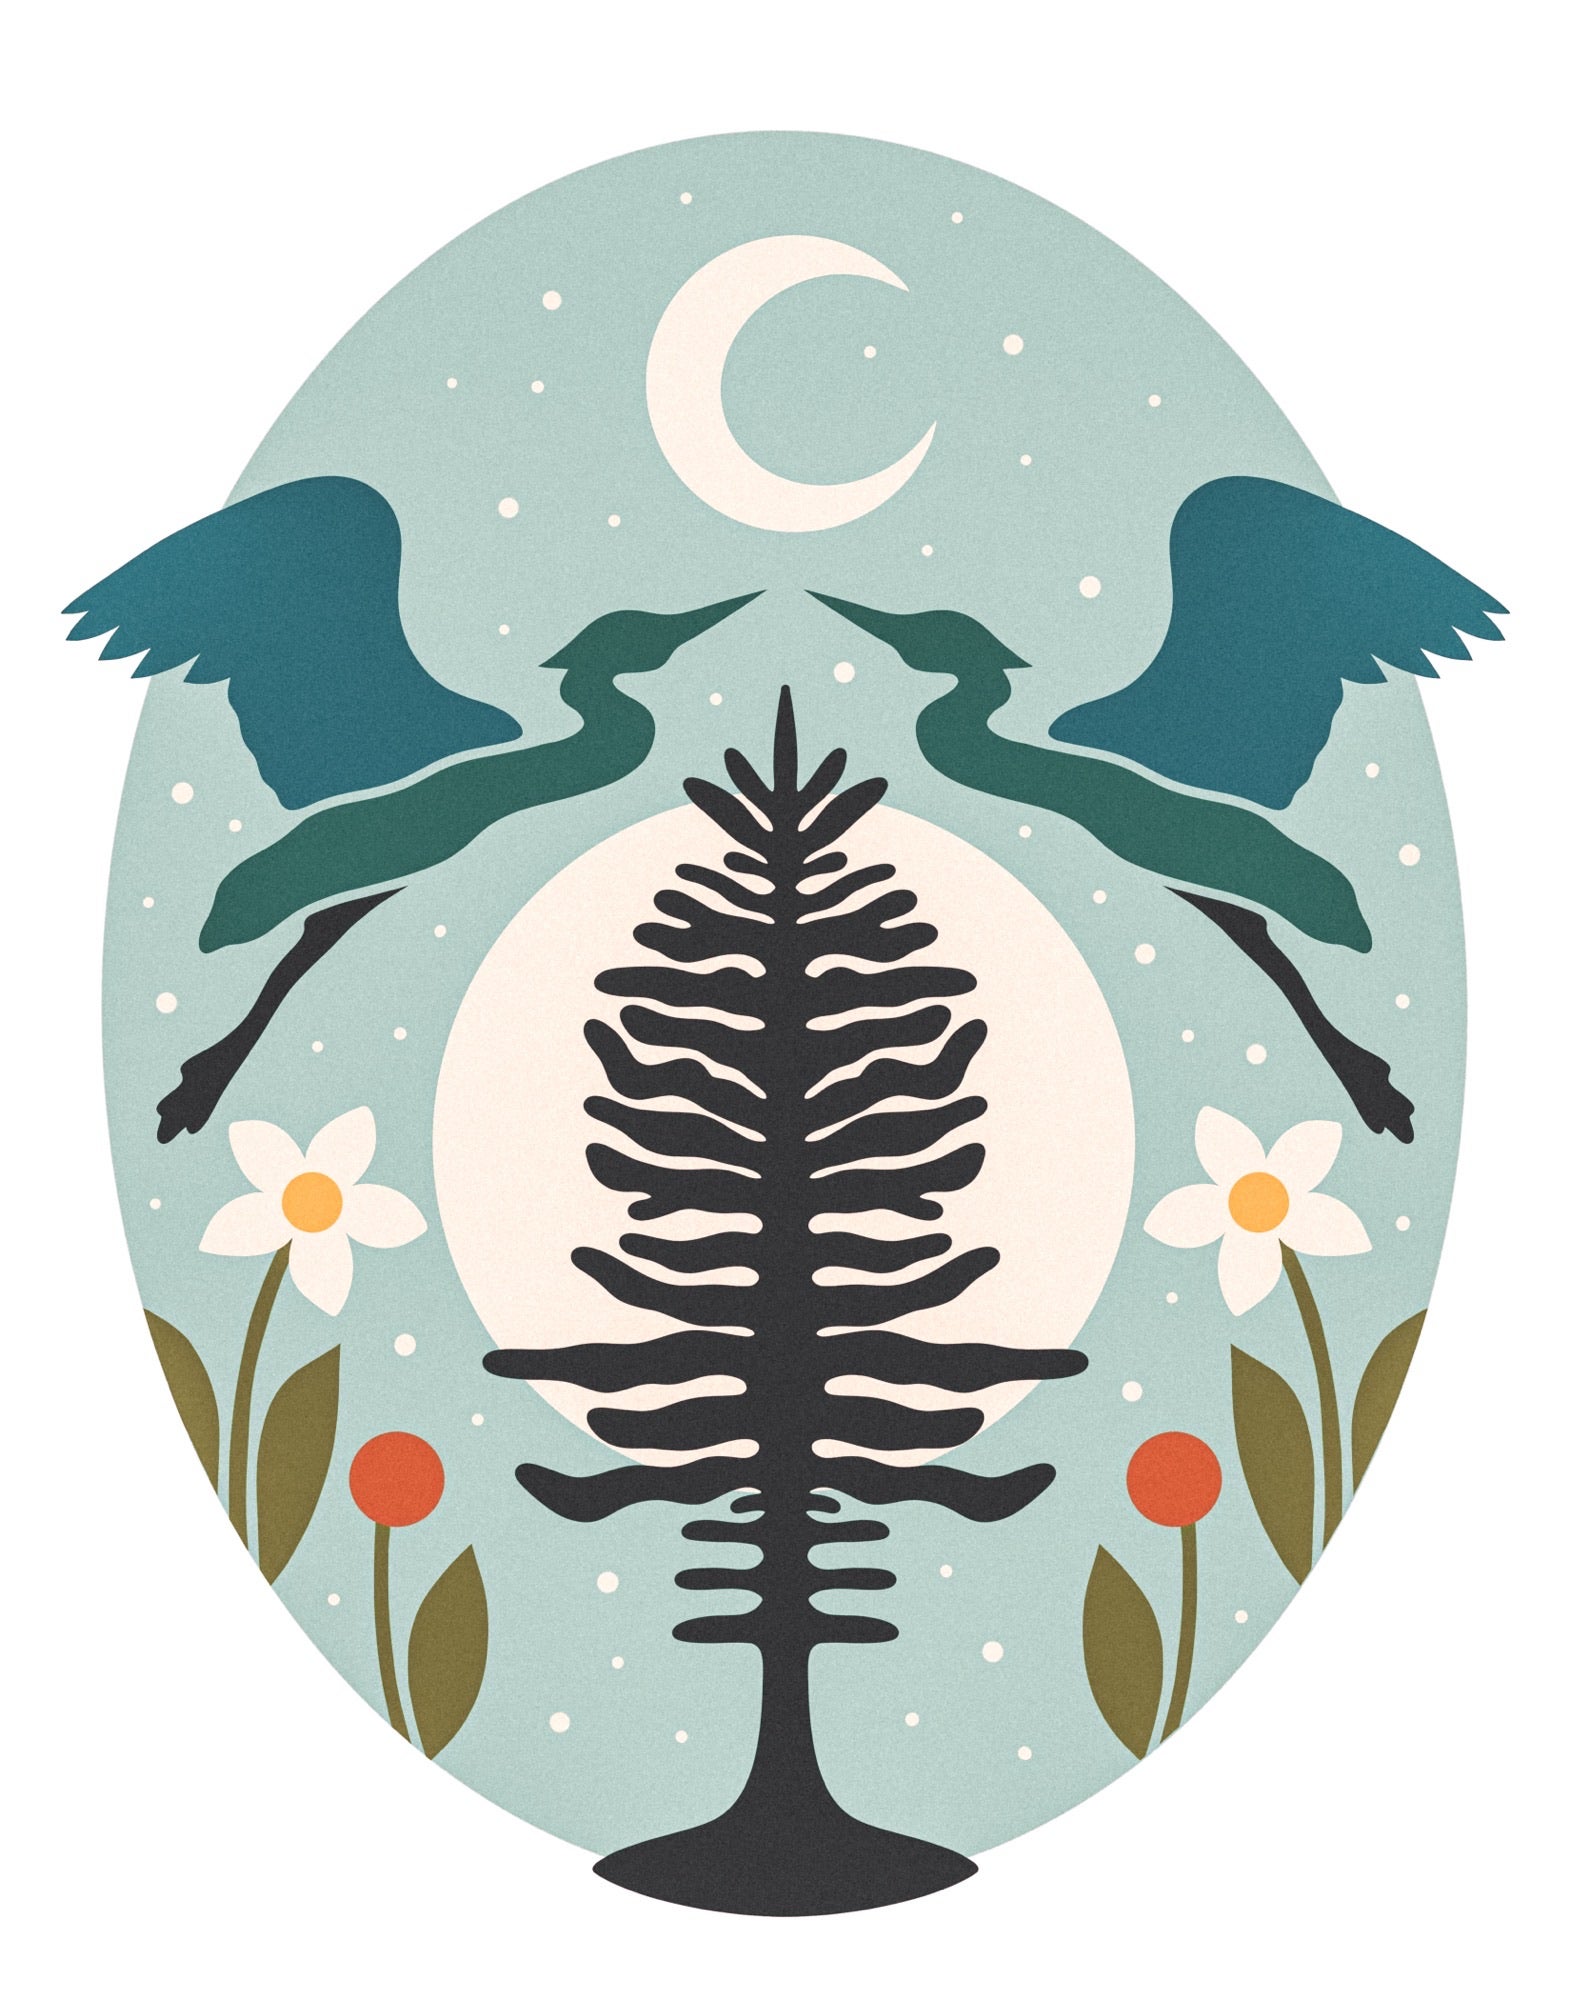 The design itself featuring two herons, a tree, on a teal background